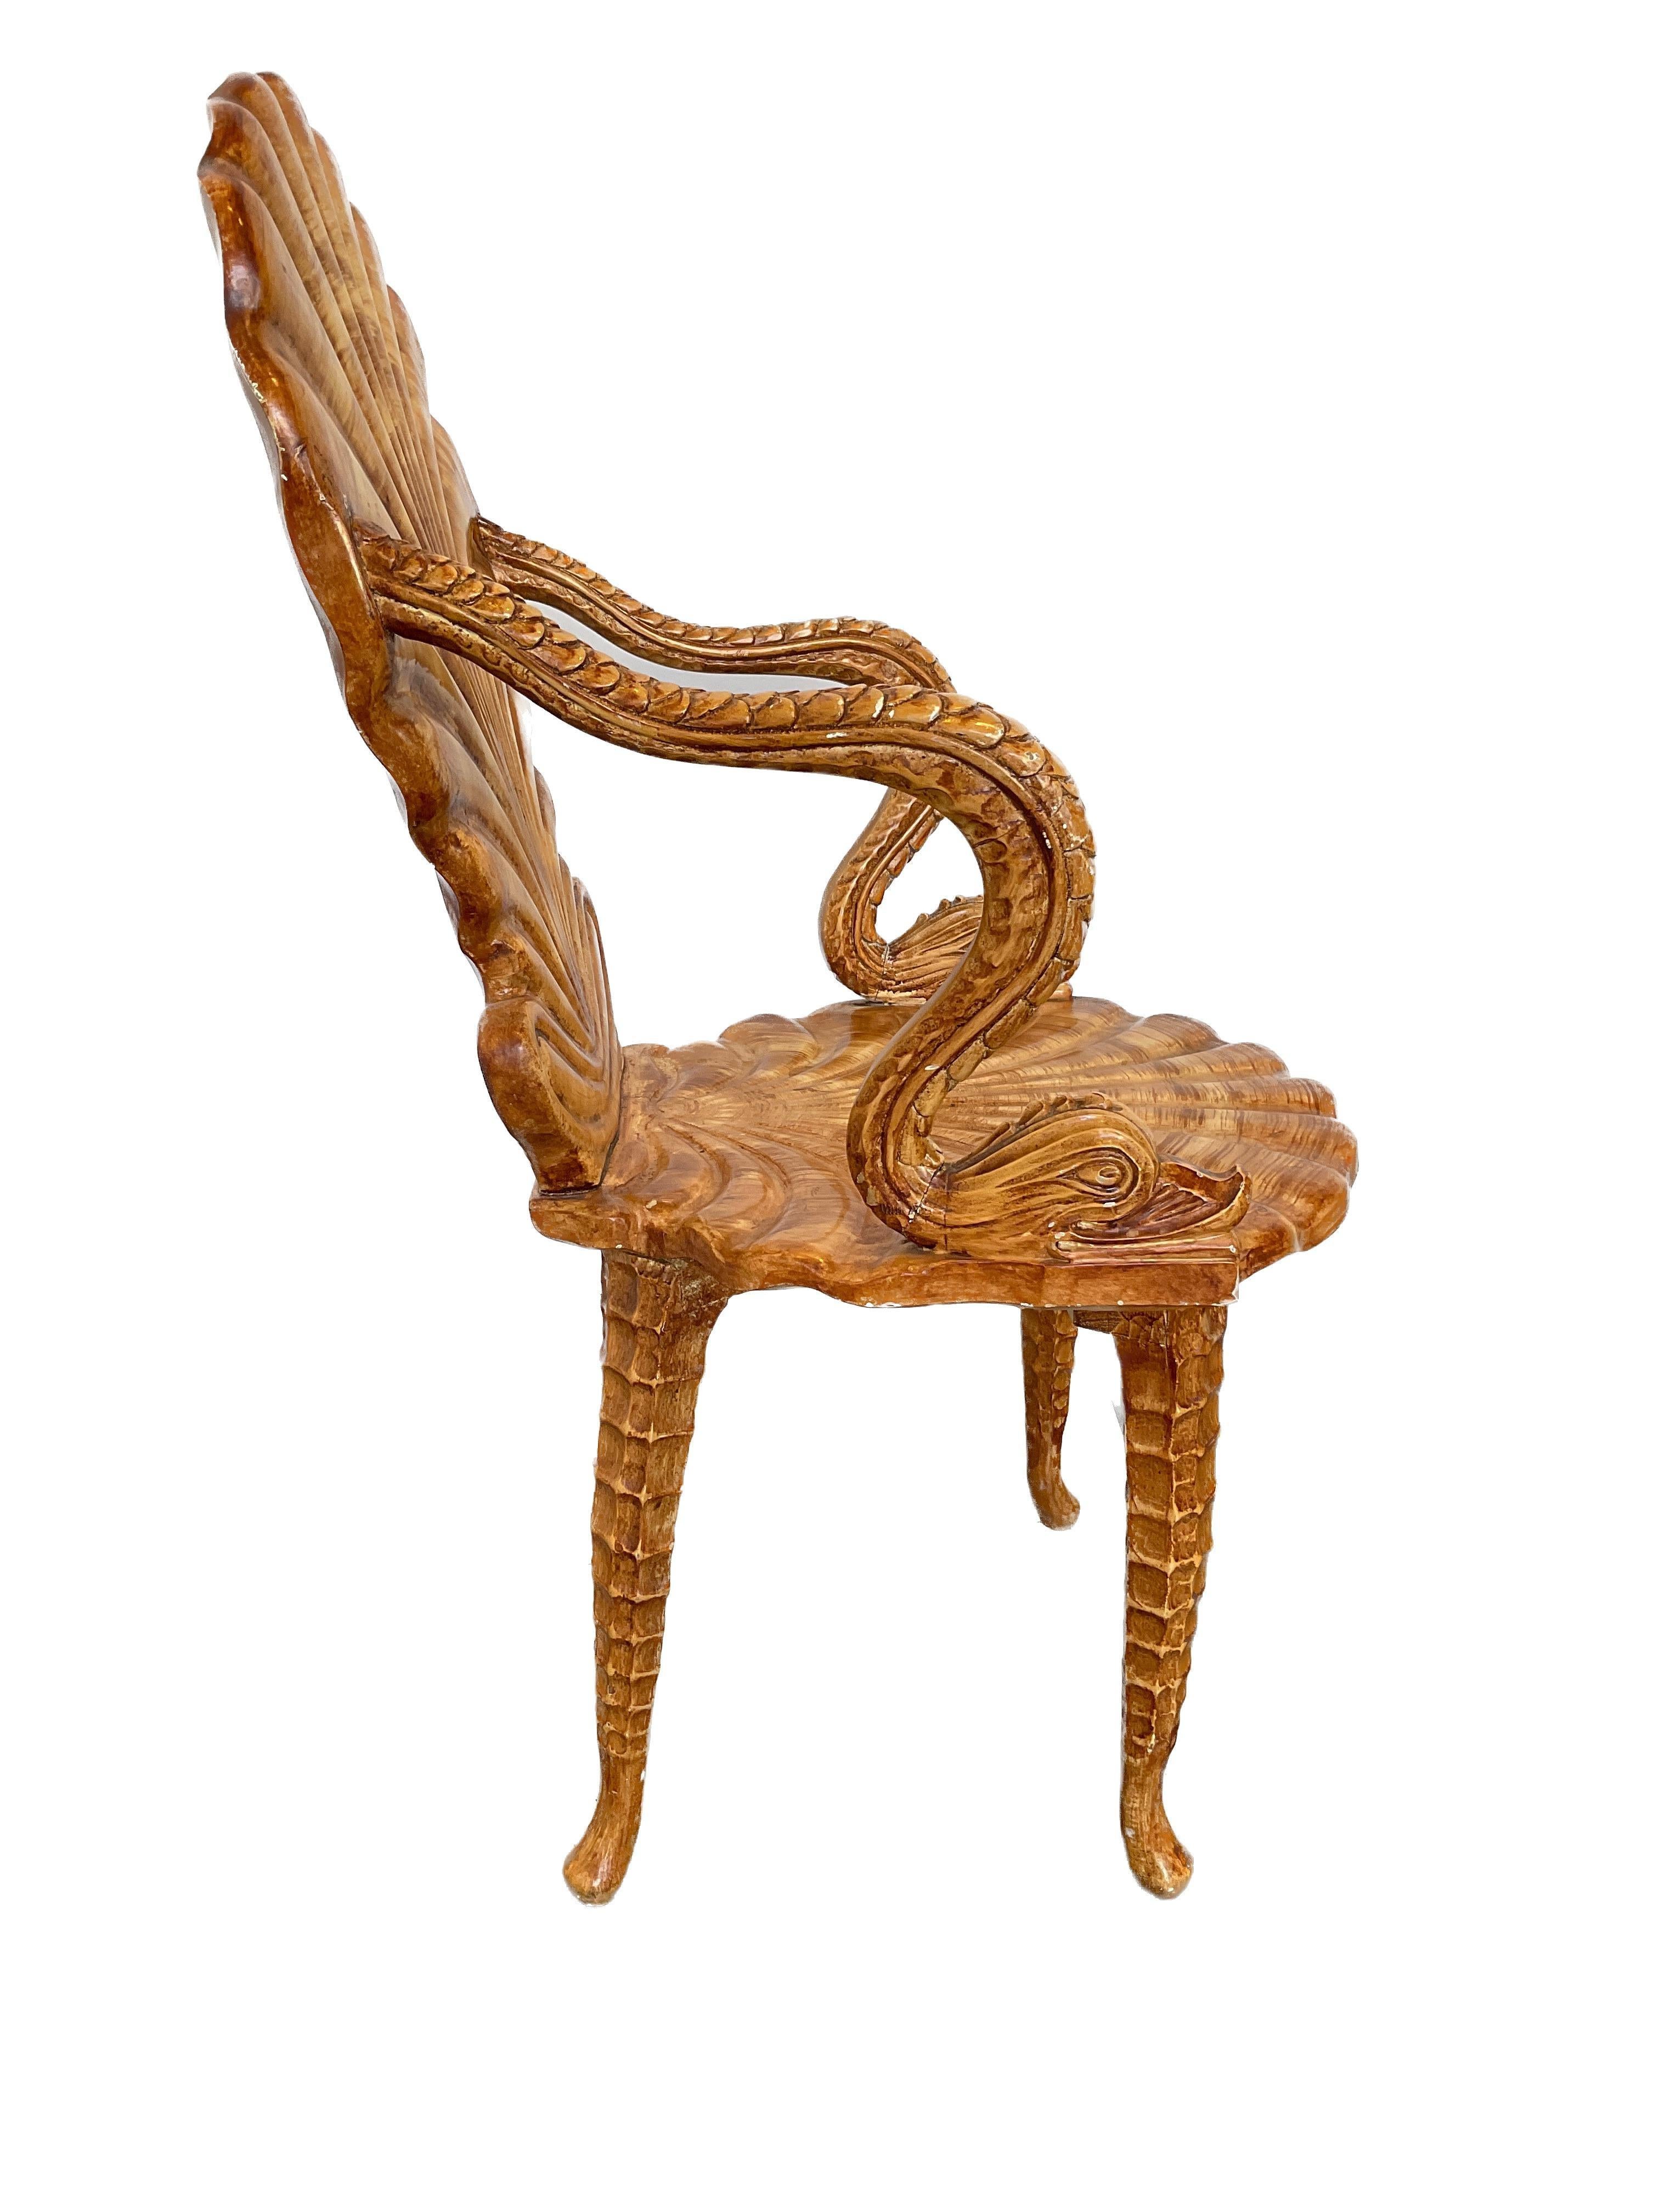 1960s Carved Wood Italian Fantasy Chair 2